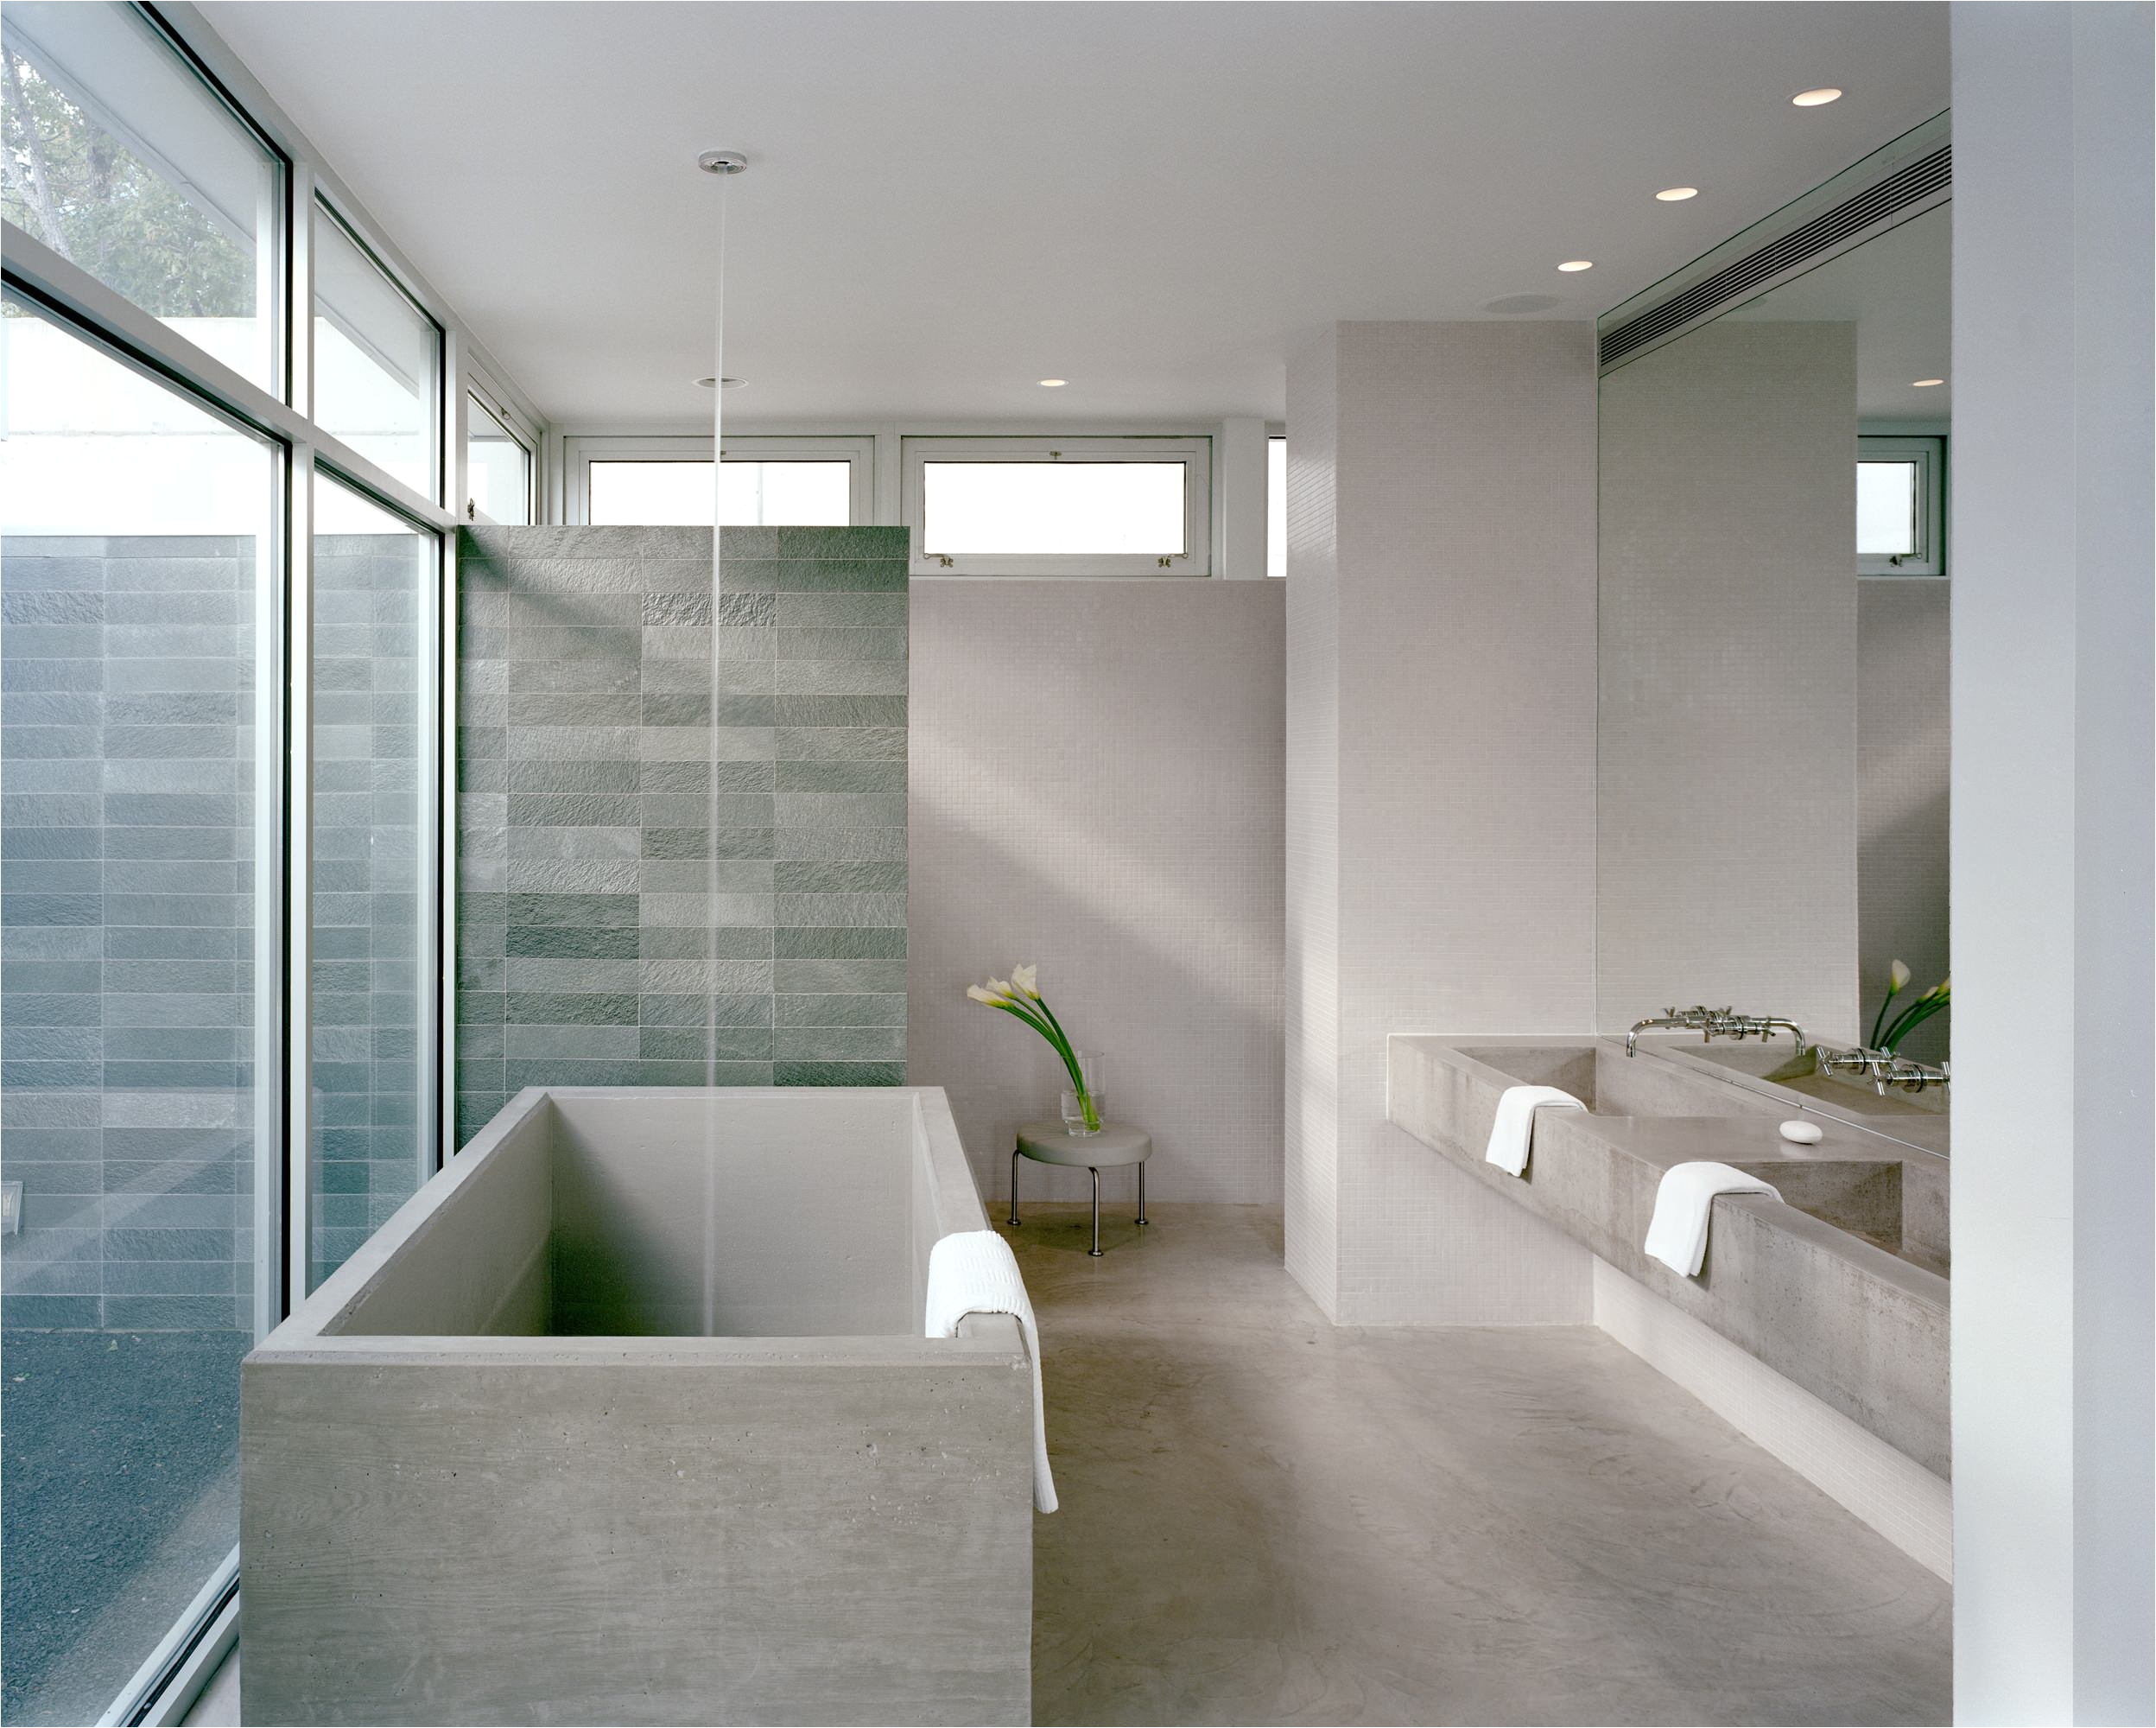 18 extraordinary modern bathroom interior designs youll instantly want to have